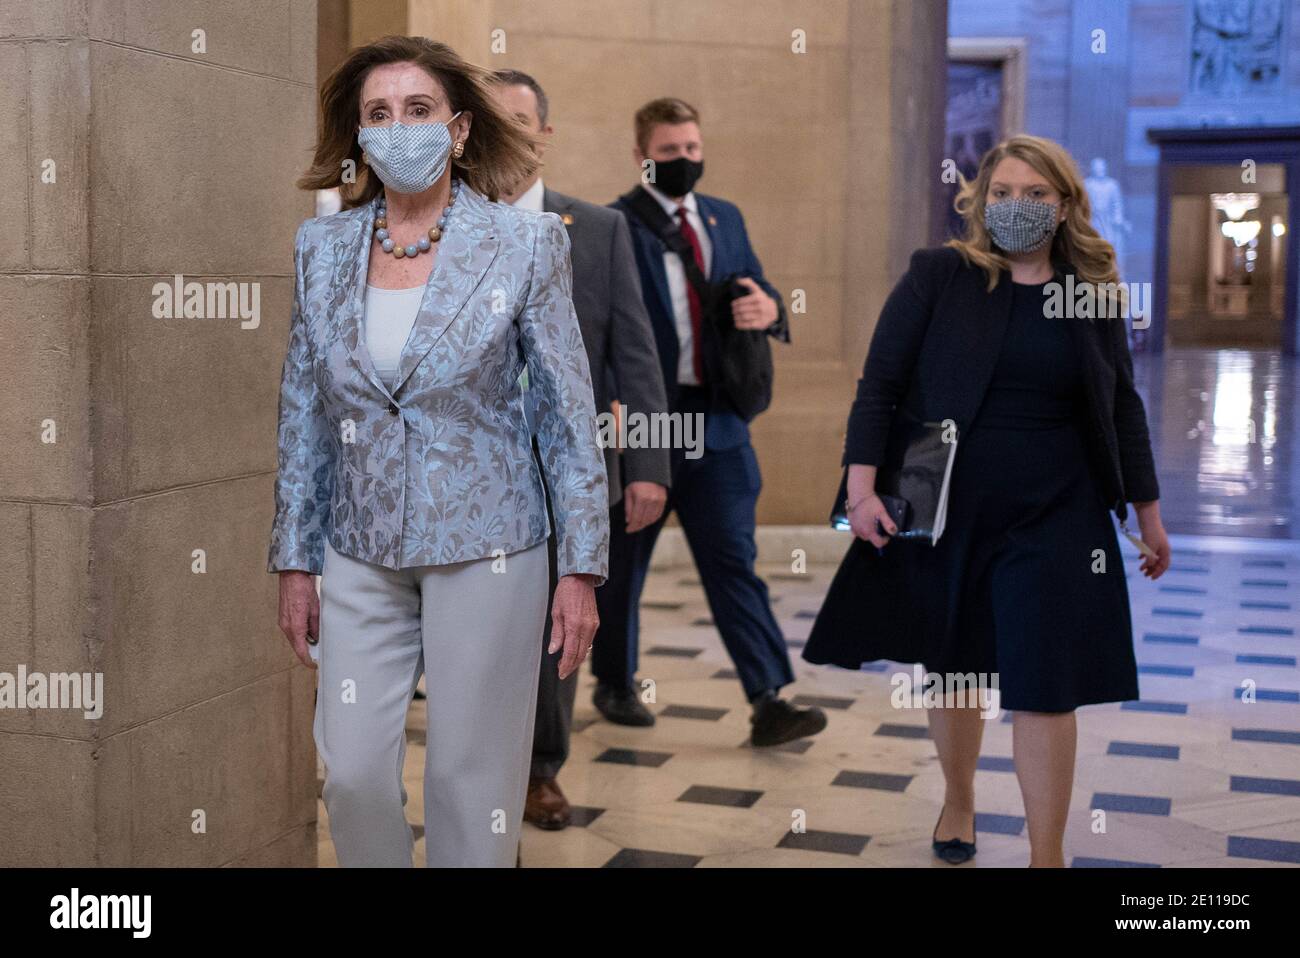 Washington, United States. 03rd Jan, 2021. Speaker of the House Nancy Pelosi, (D-CA) leaves her office and walks to the House floor as both chambers are holding sessions to open the new 117th Congress on January 3, 2021 in Washington DC. Photo by Ken Cedeno/Sipa USA Credit: Sipa USA/Alamy Live News Stock Photo